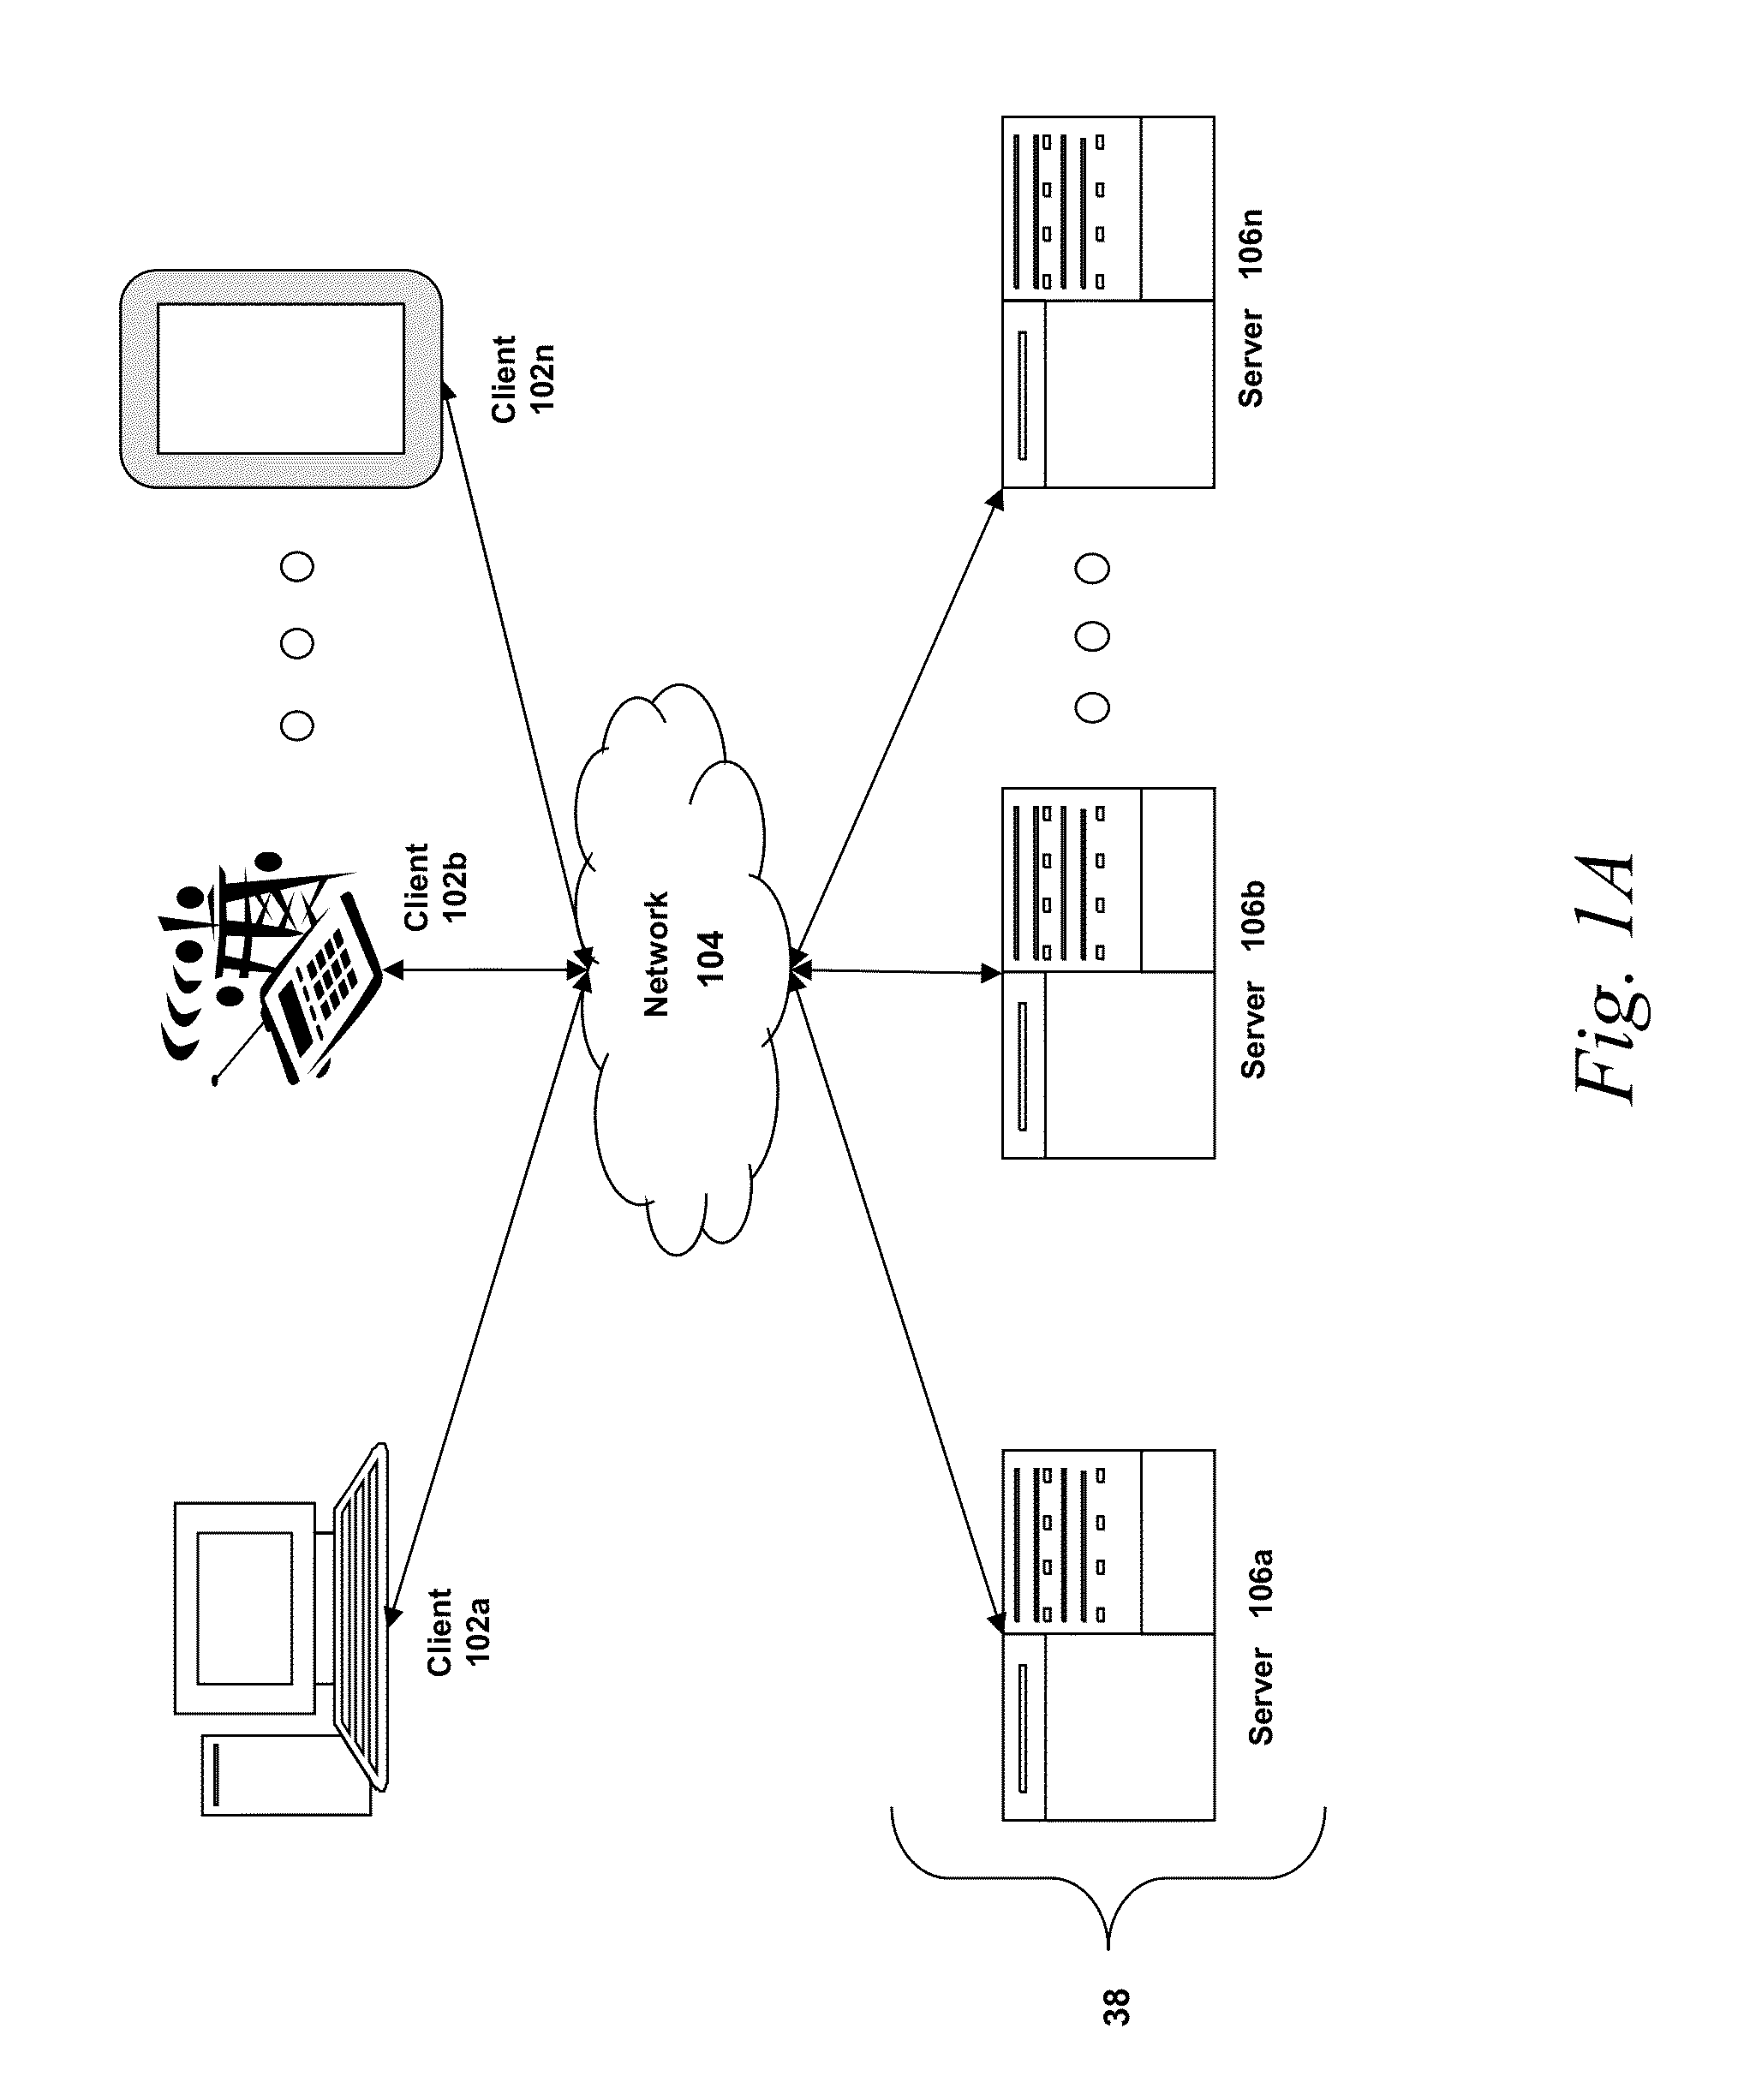 Systems and methods for self-tuning network intrusion detection and prevention